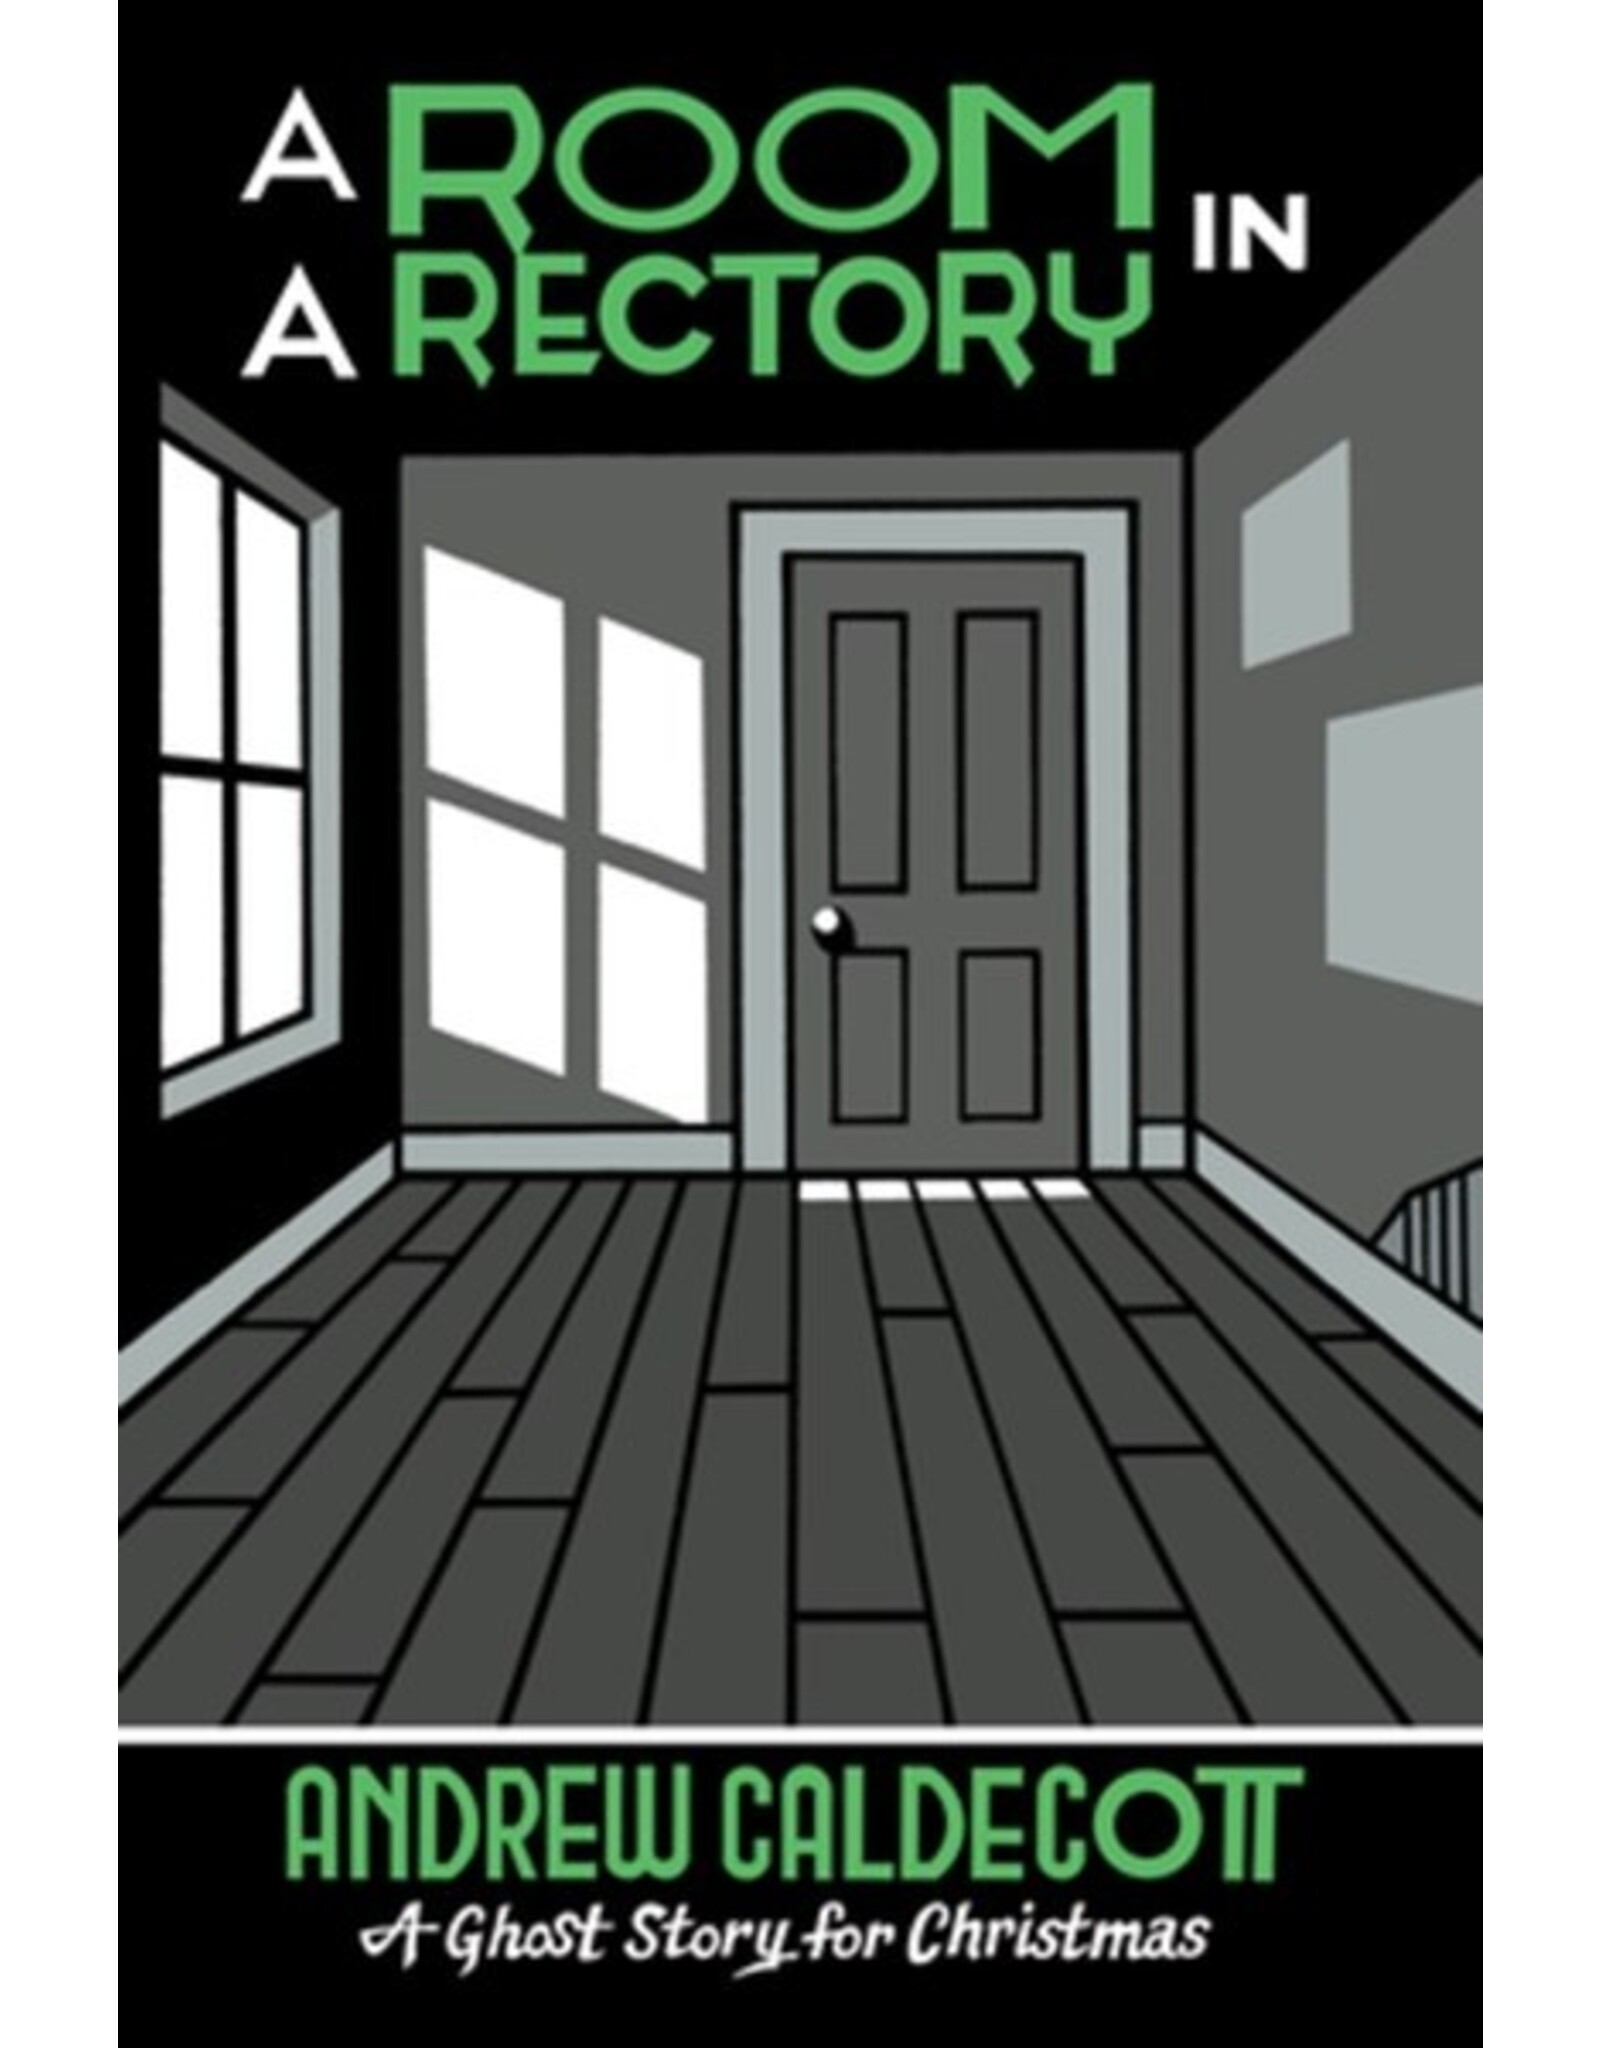 Books A Room in a Rectory by Andrew Caldecott : A Ghost Story for Christmas (Holiday Catalog 2023)